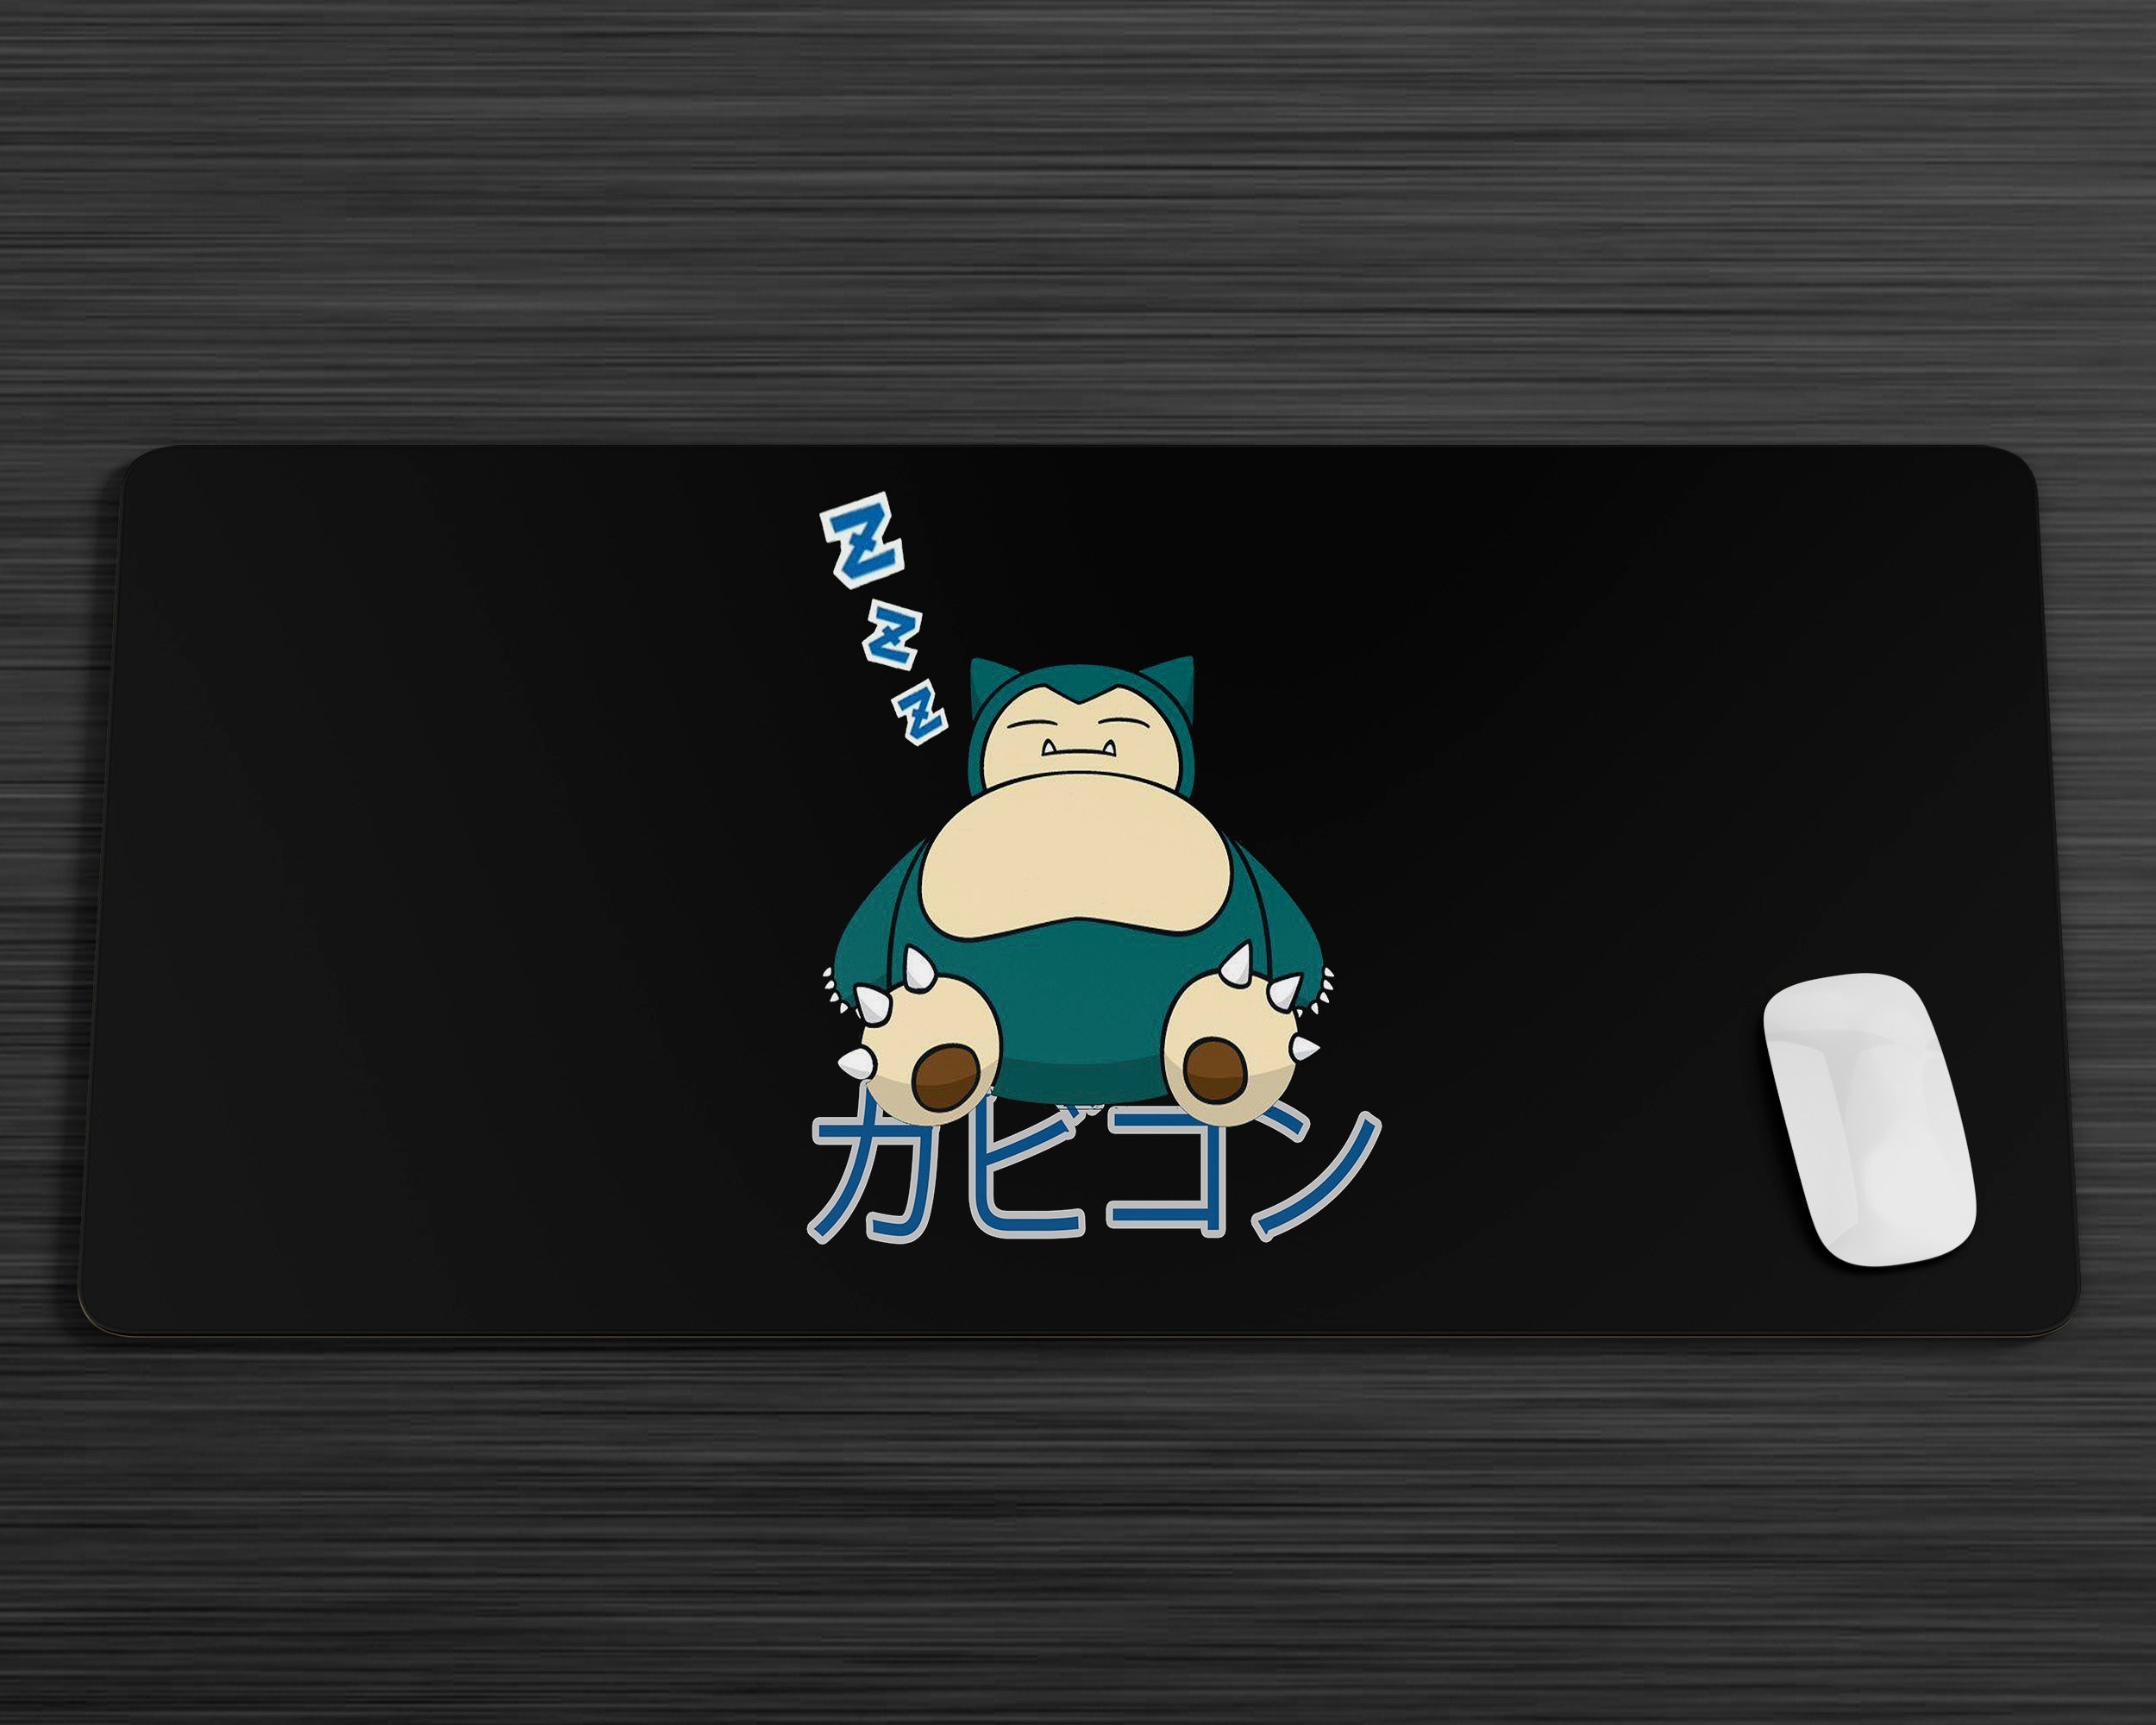 LIMITED EDITION of 200 Pokemon Snorlax Enamel Pin Anime | RePop Gifts